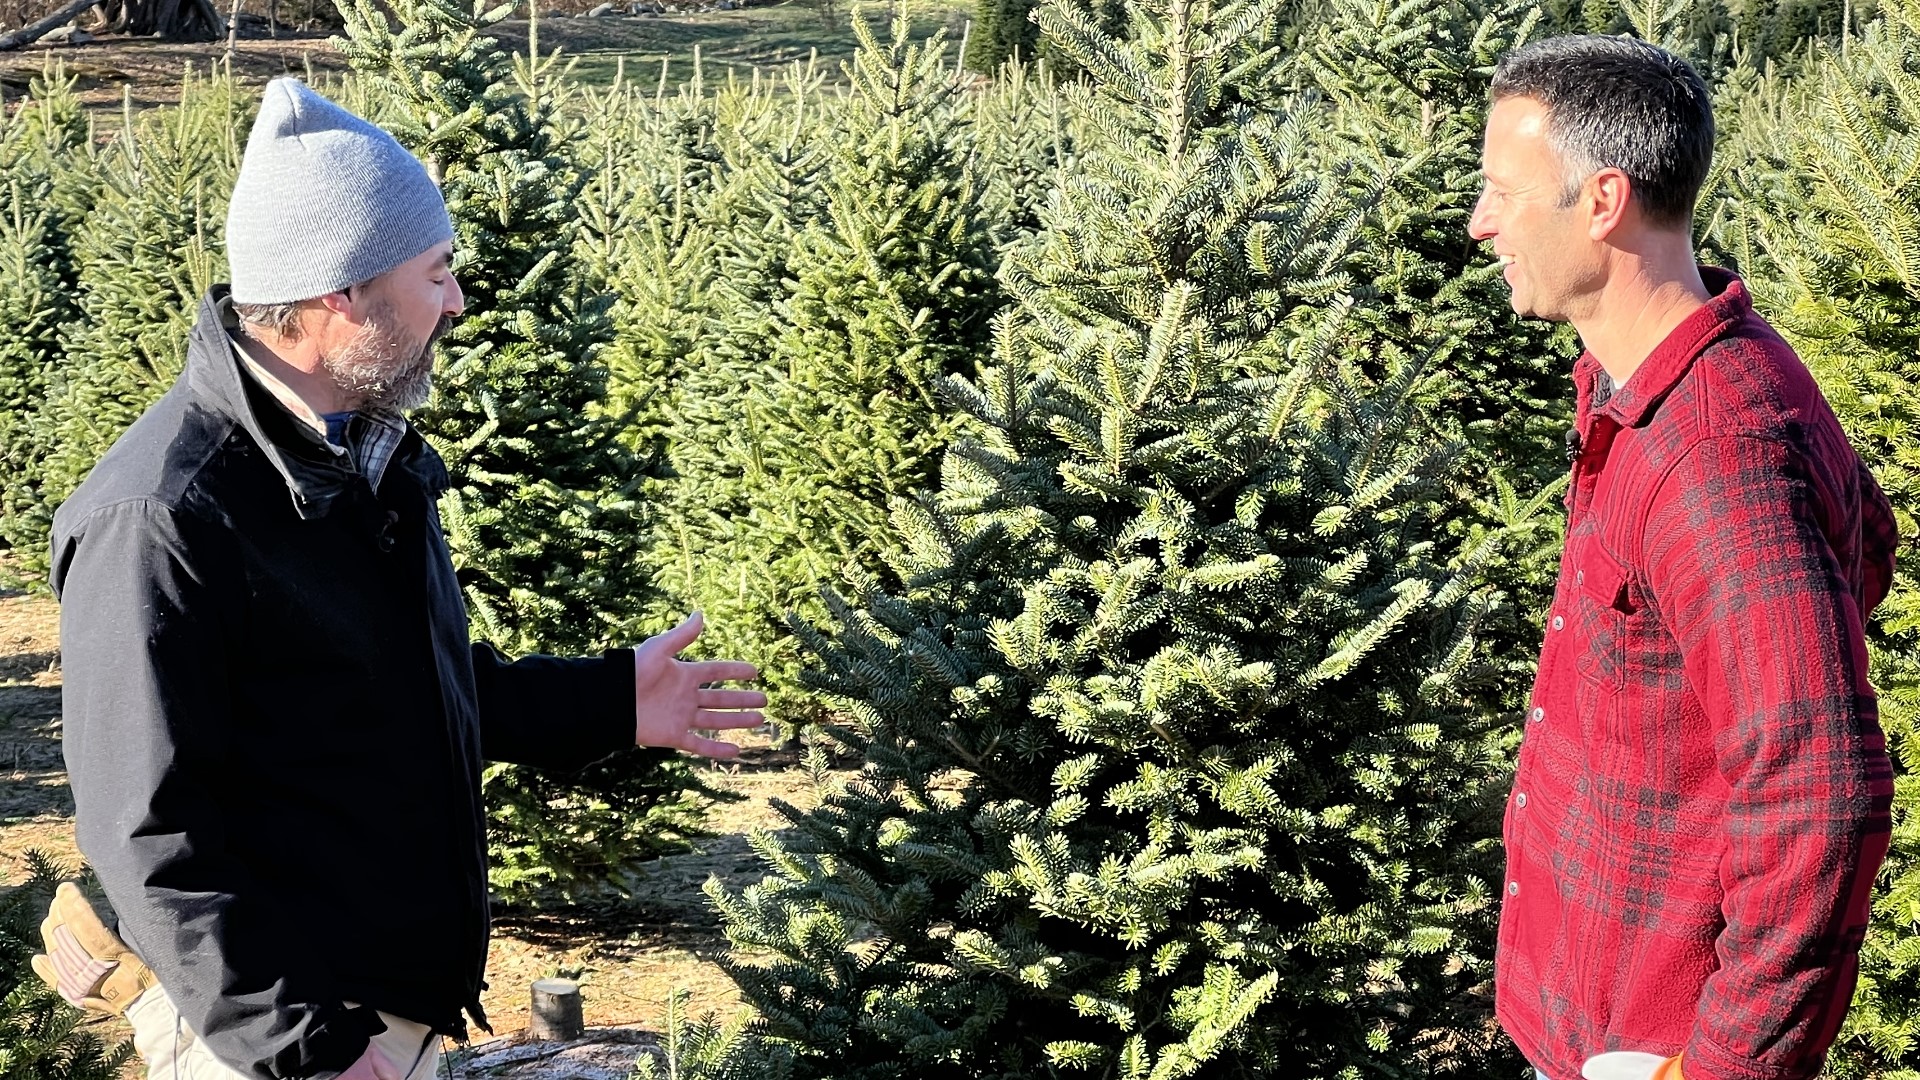 Gardening with Gutner learns what it takes to grow and care for the perfect Christmas tree